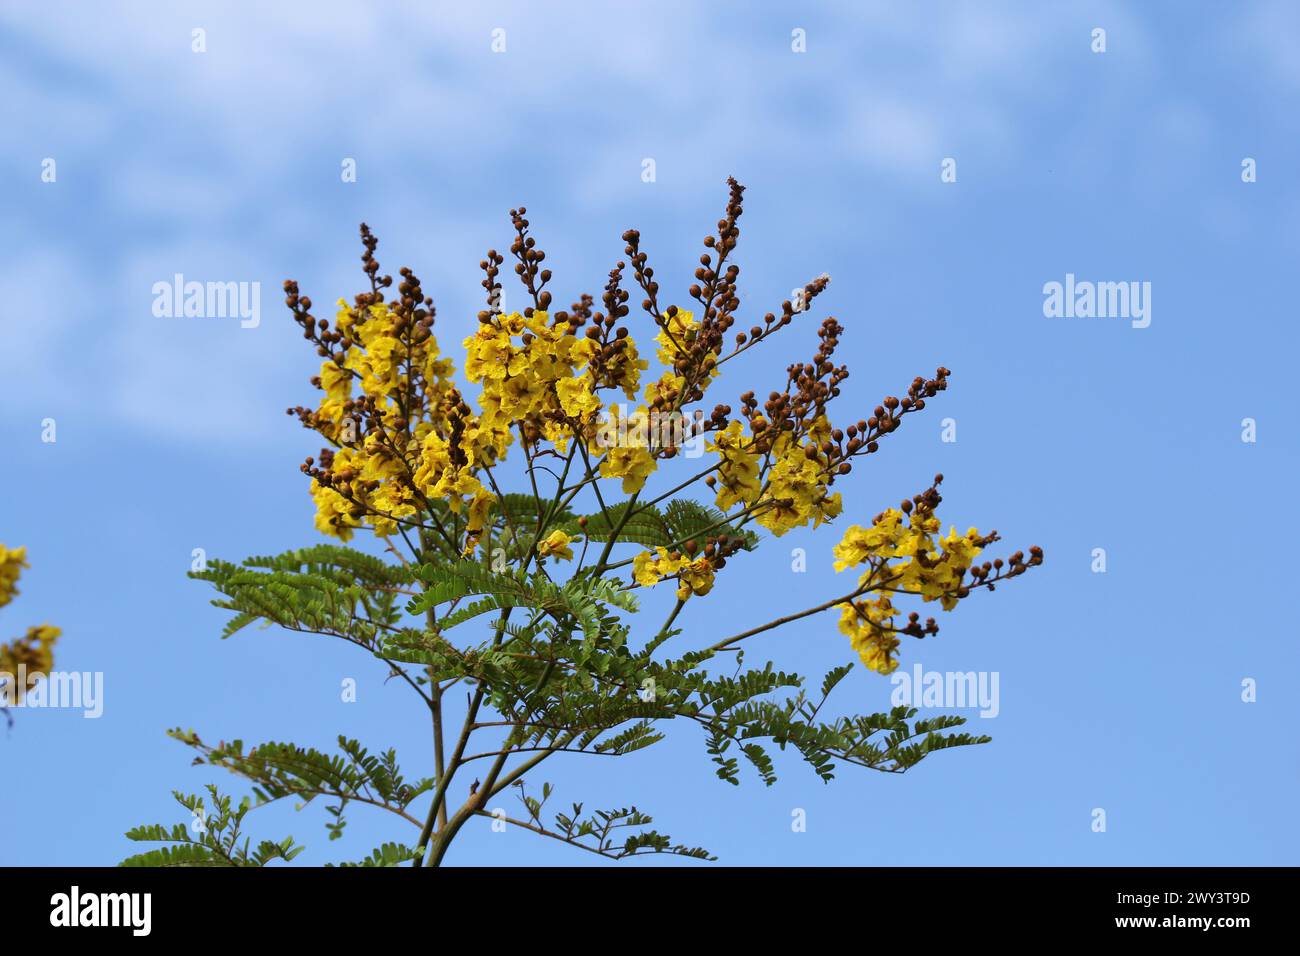 Flowers on a peltophorum pterocarpum (yellow poinciana) plant against a blue sky with clouds Stock Photo